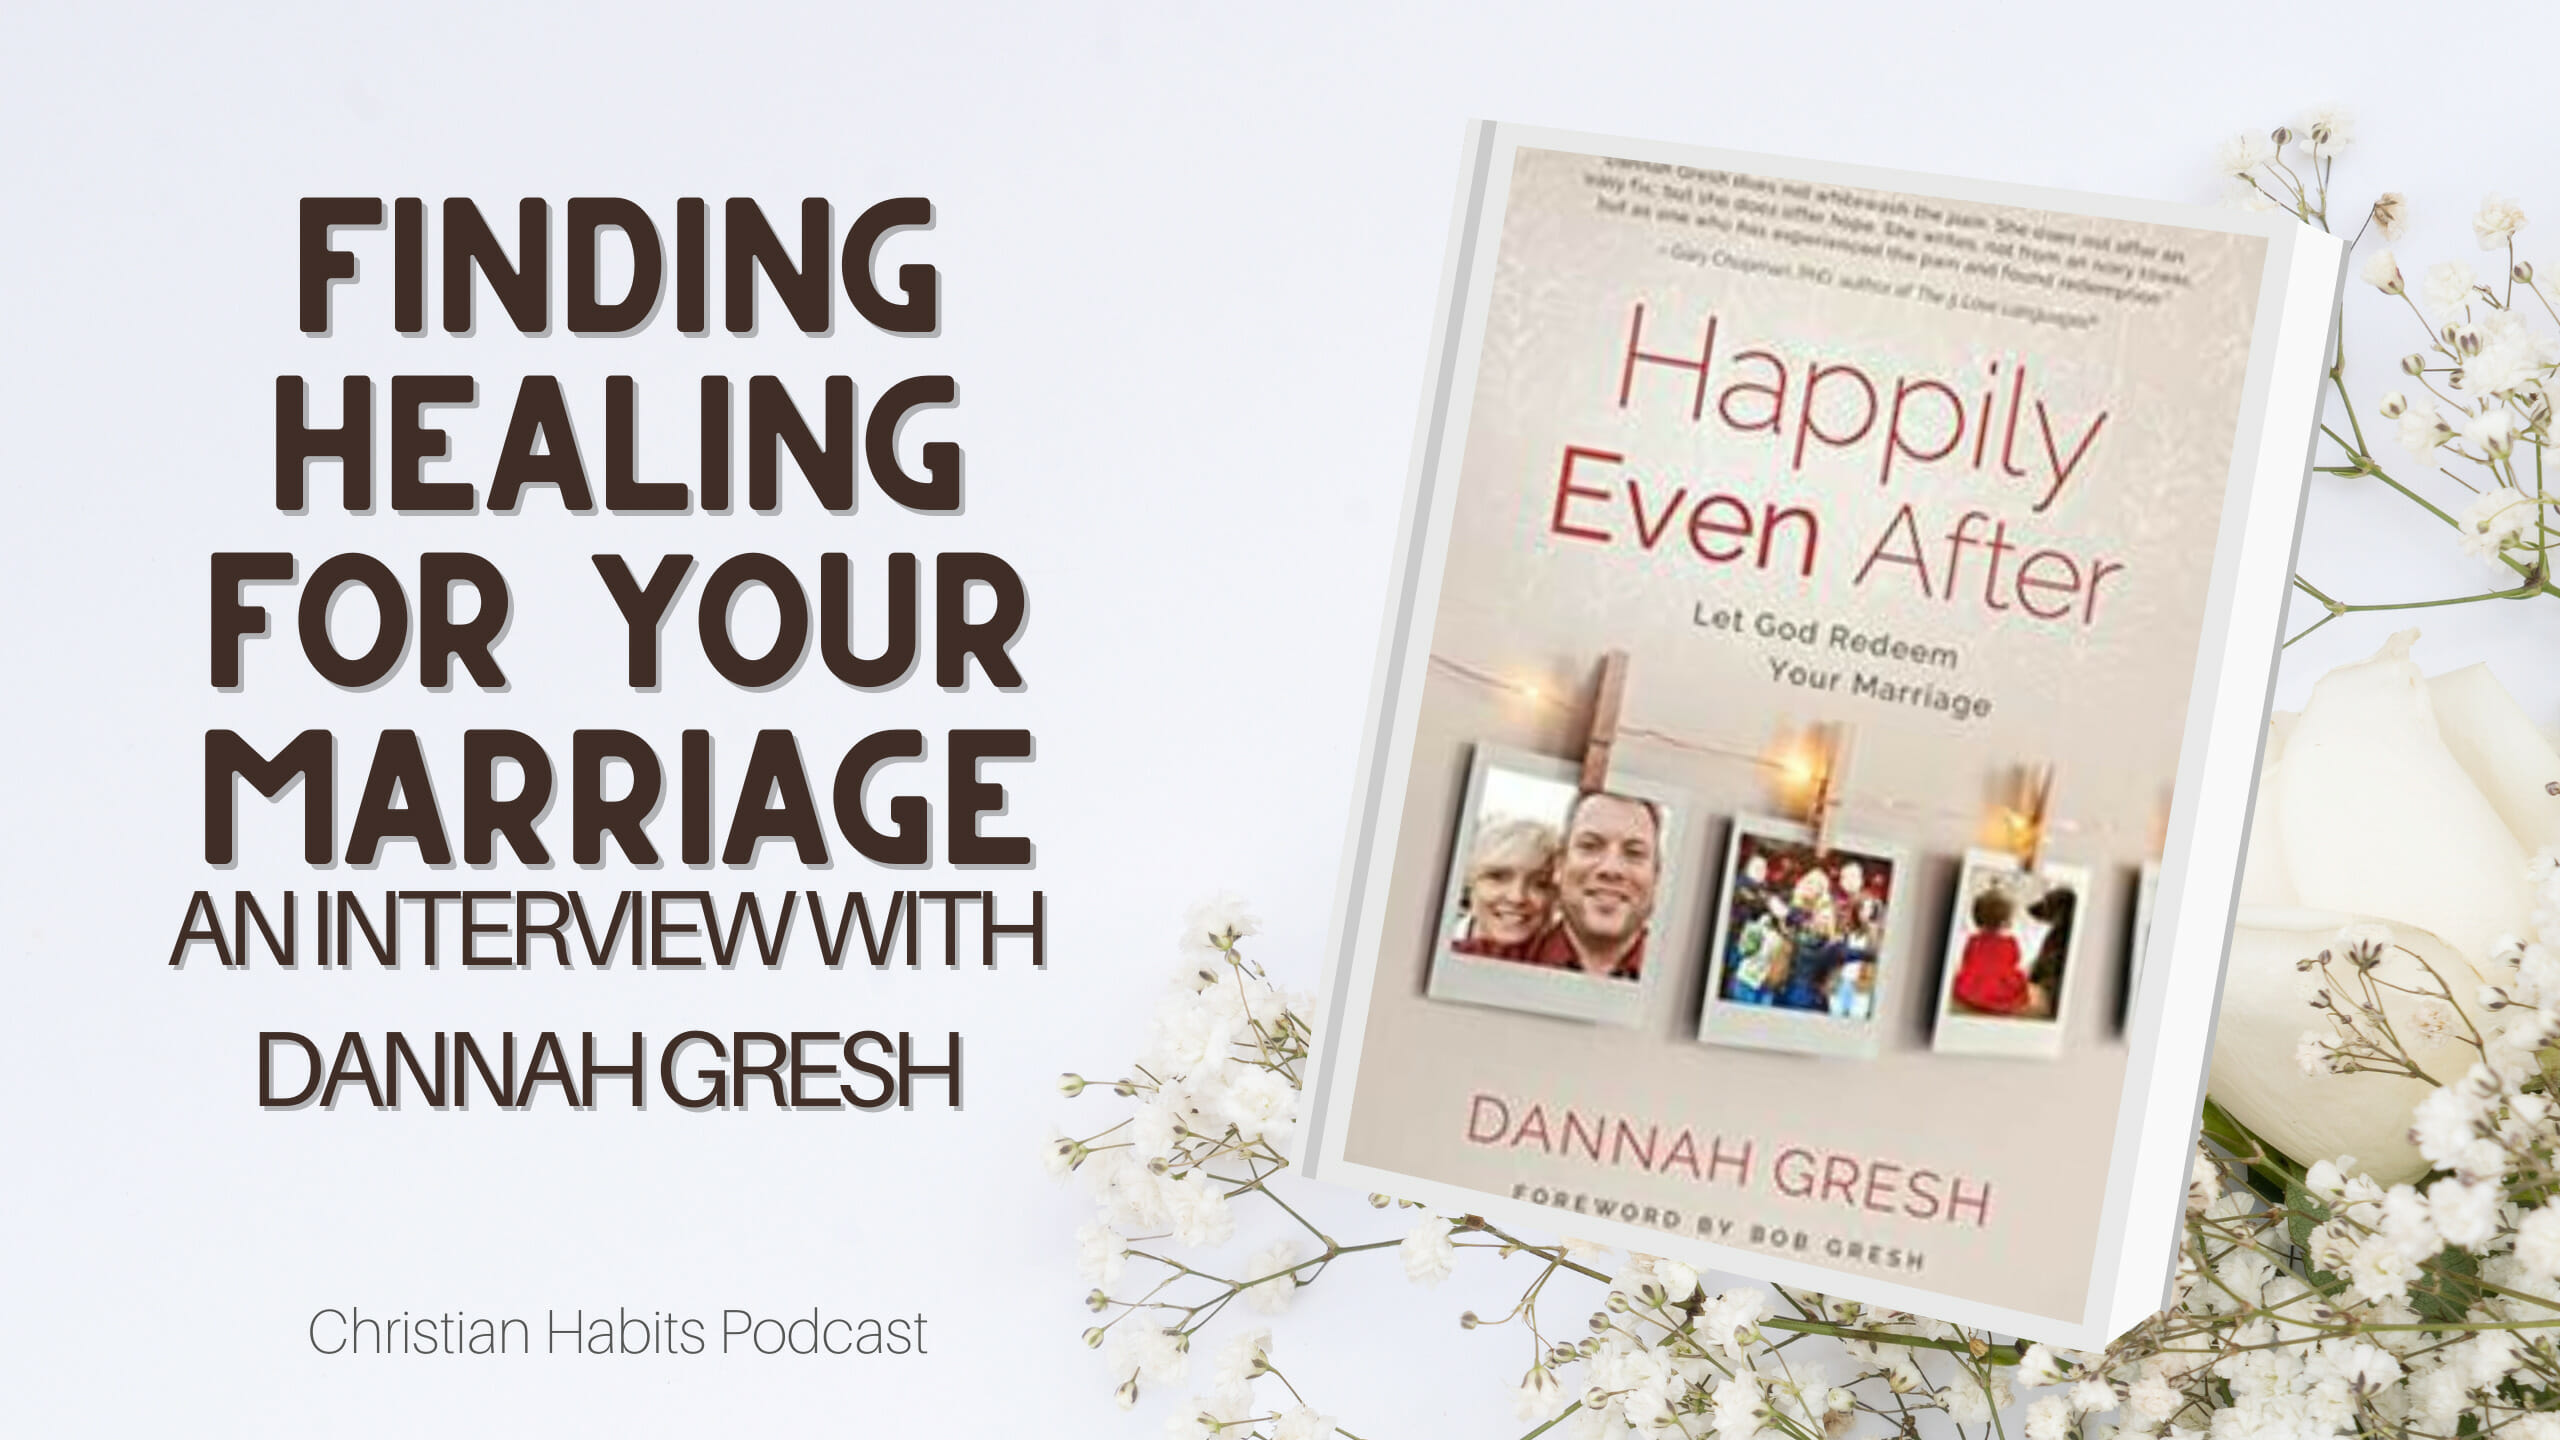 Finding Healing for Your Marriage an interview with Dannah Gresh